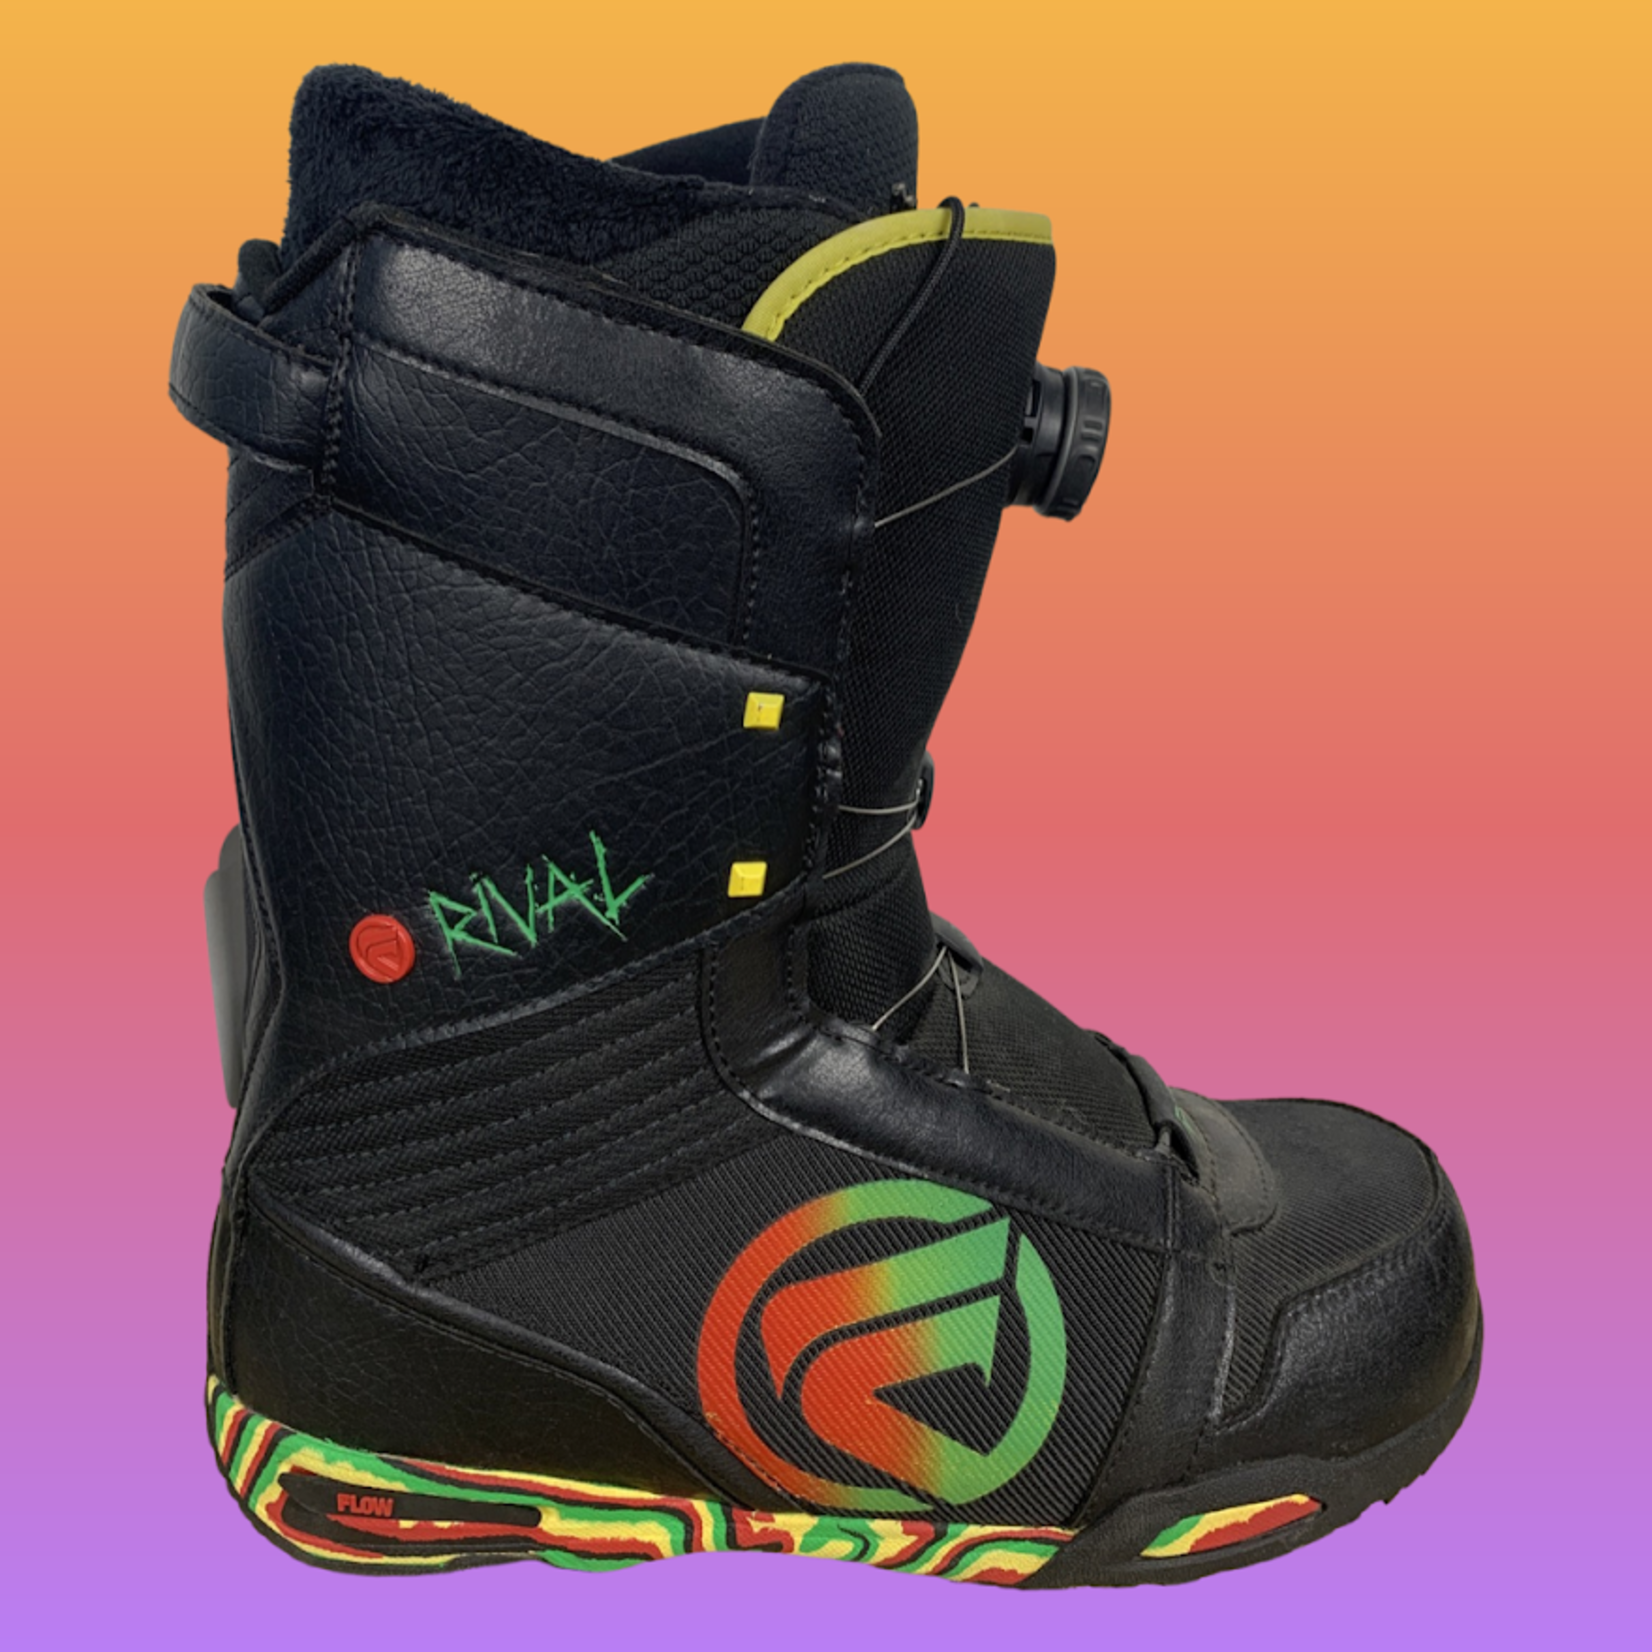 Flow Rival Snowboard Boots, Size 11